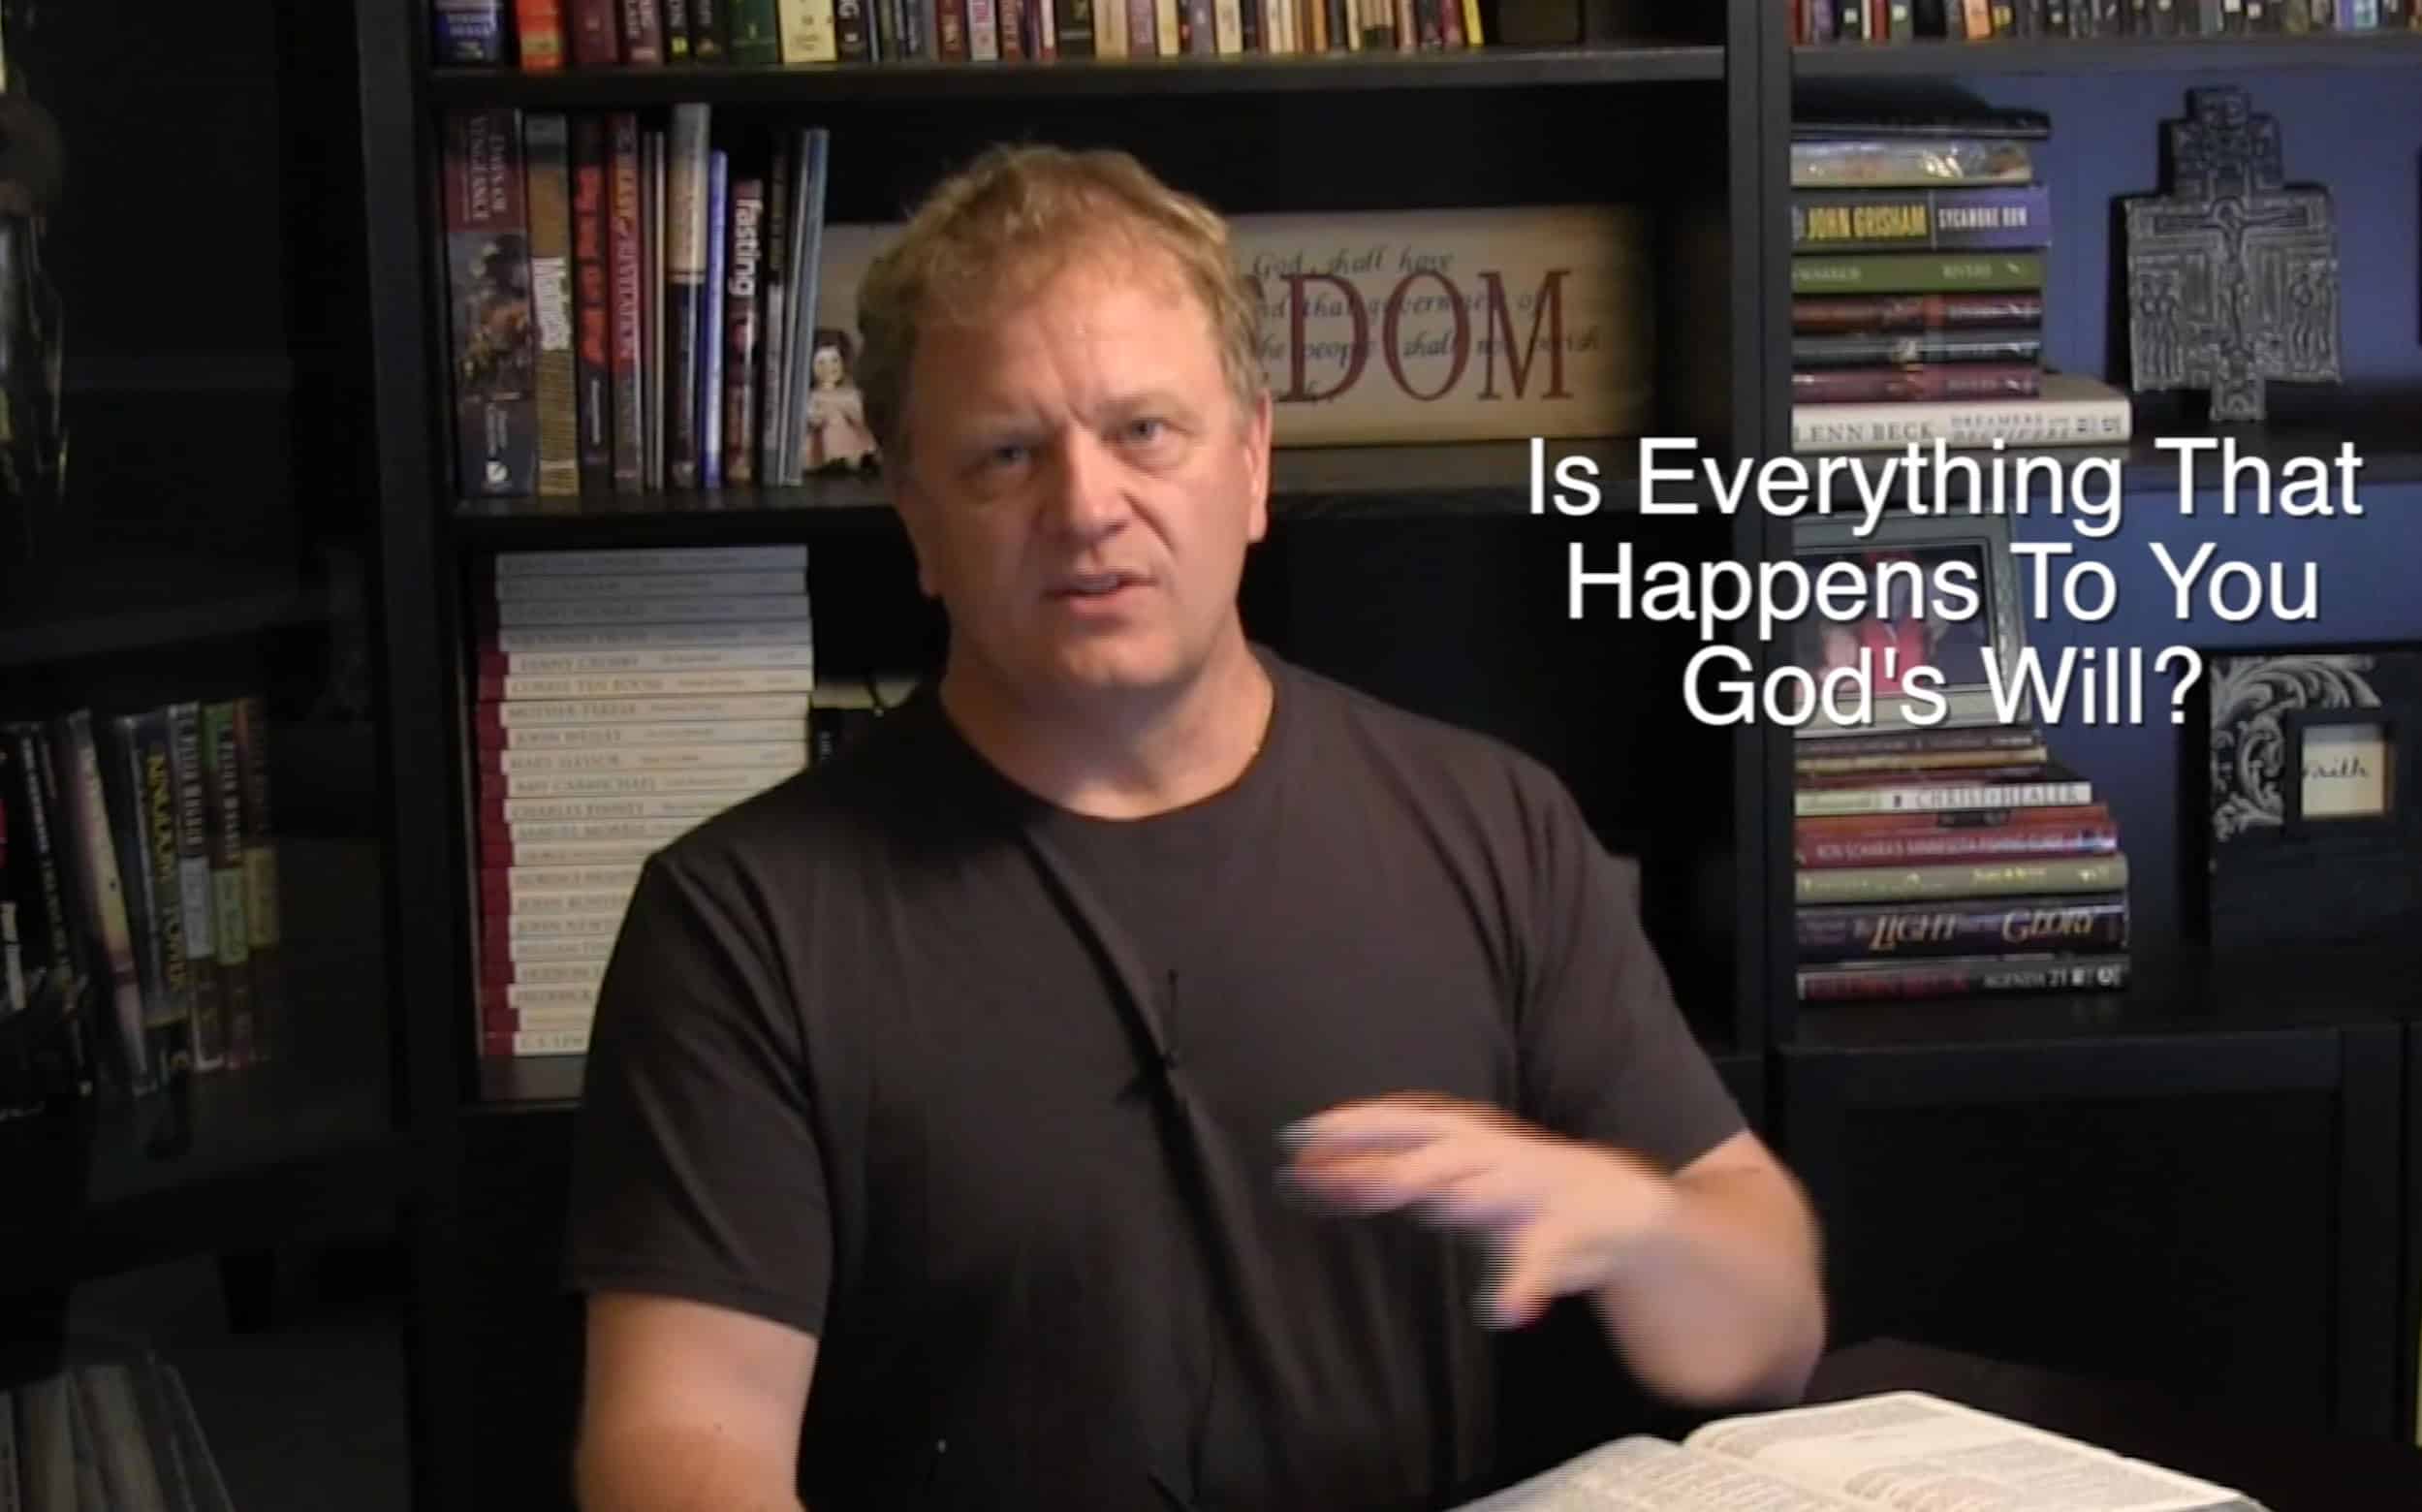 IS EVERYTHING THAT HAPPENS TO ME GOD’S WILL ? – TOM SCARRELLA